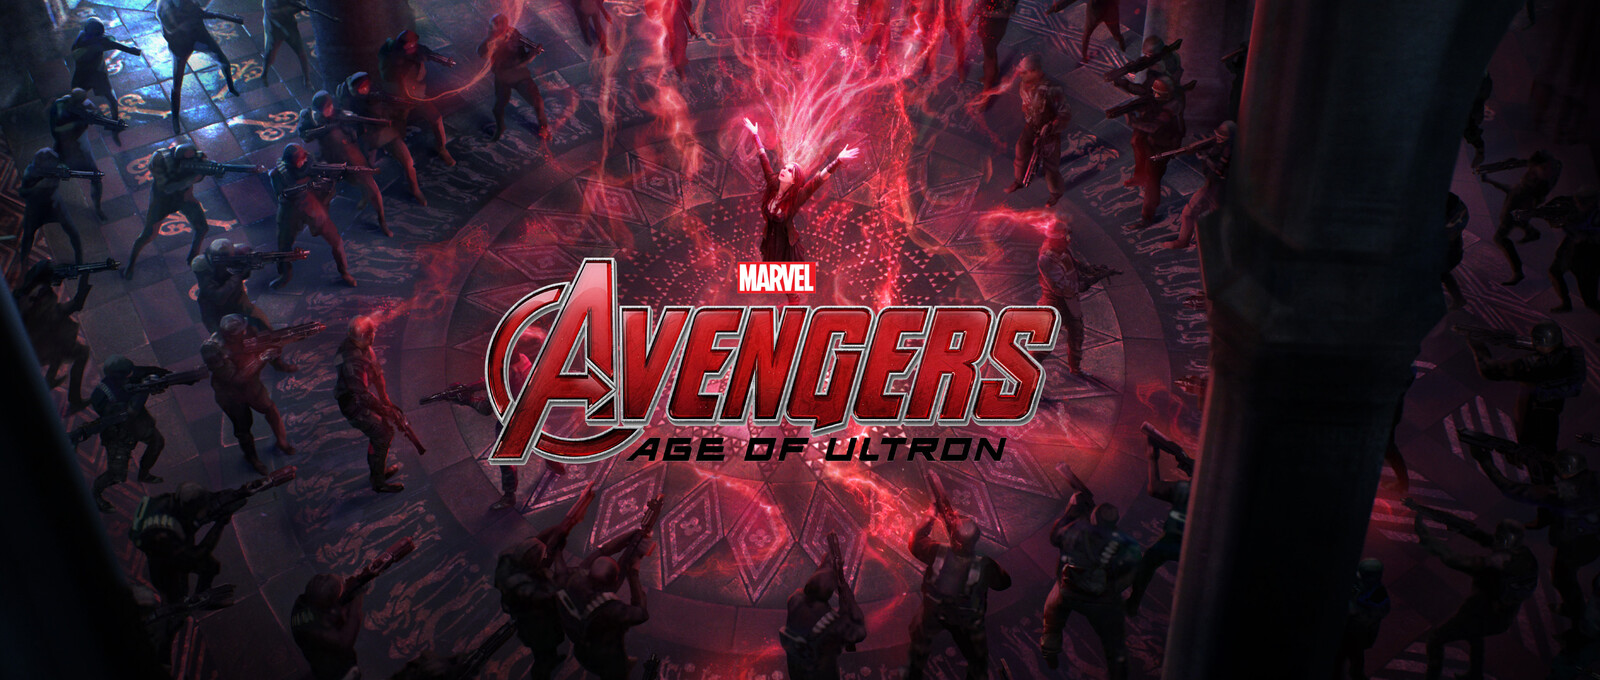 "Avengers: Age of Ultron": Concept for Scarlet's mind hex